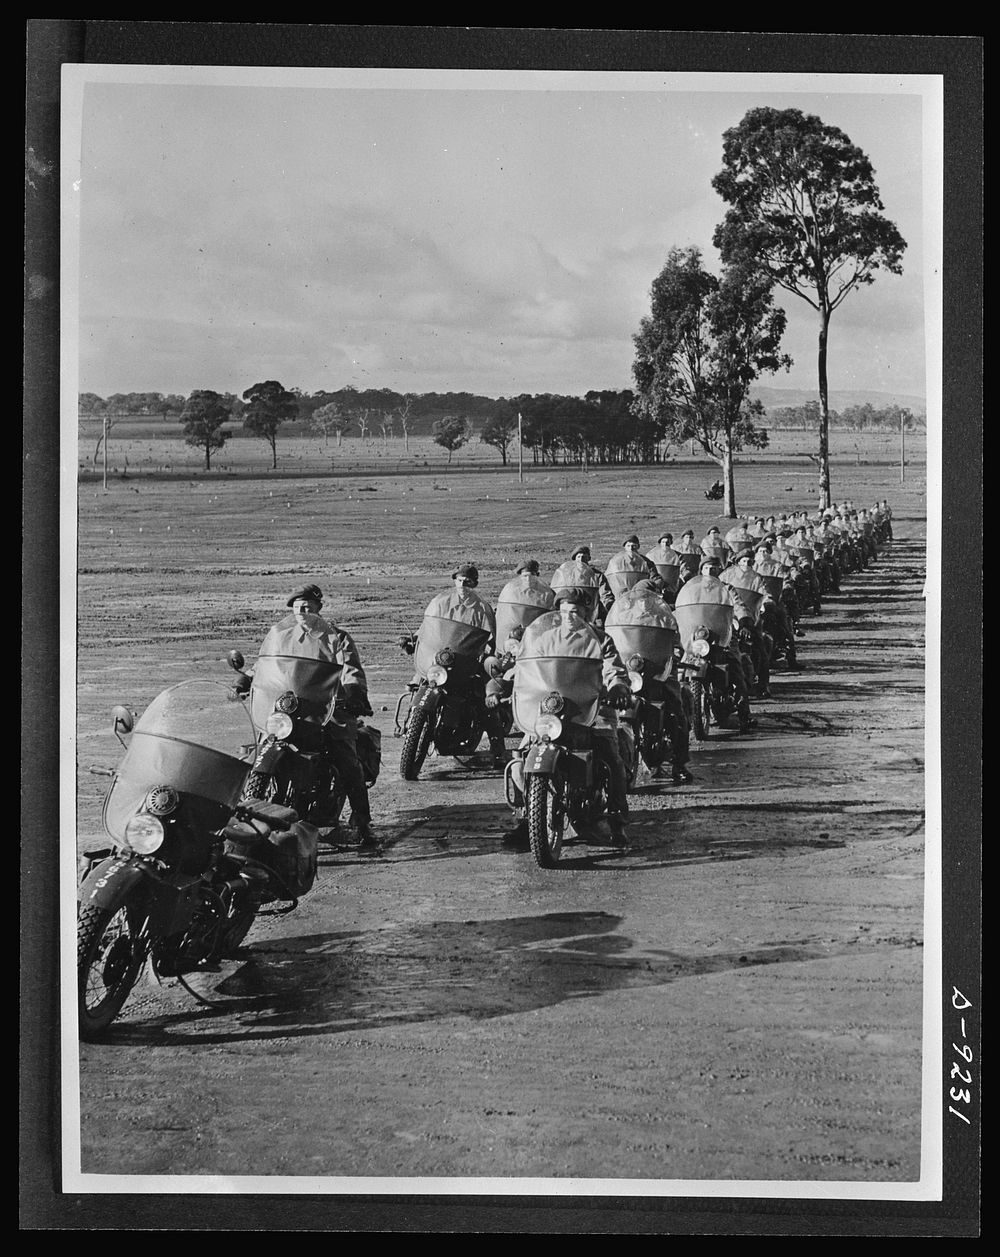 Australia in the war. American motorcycles, furnished under lend-lease, are used in this formation of Australian cyclists…